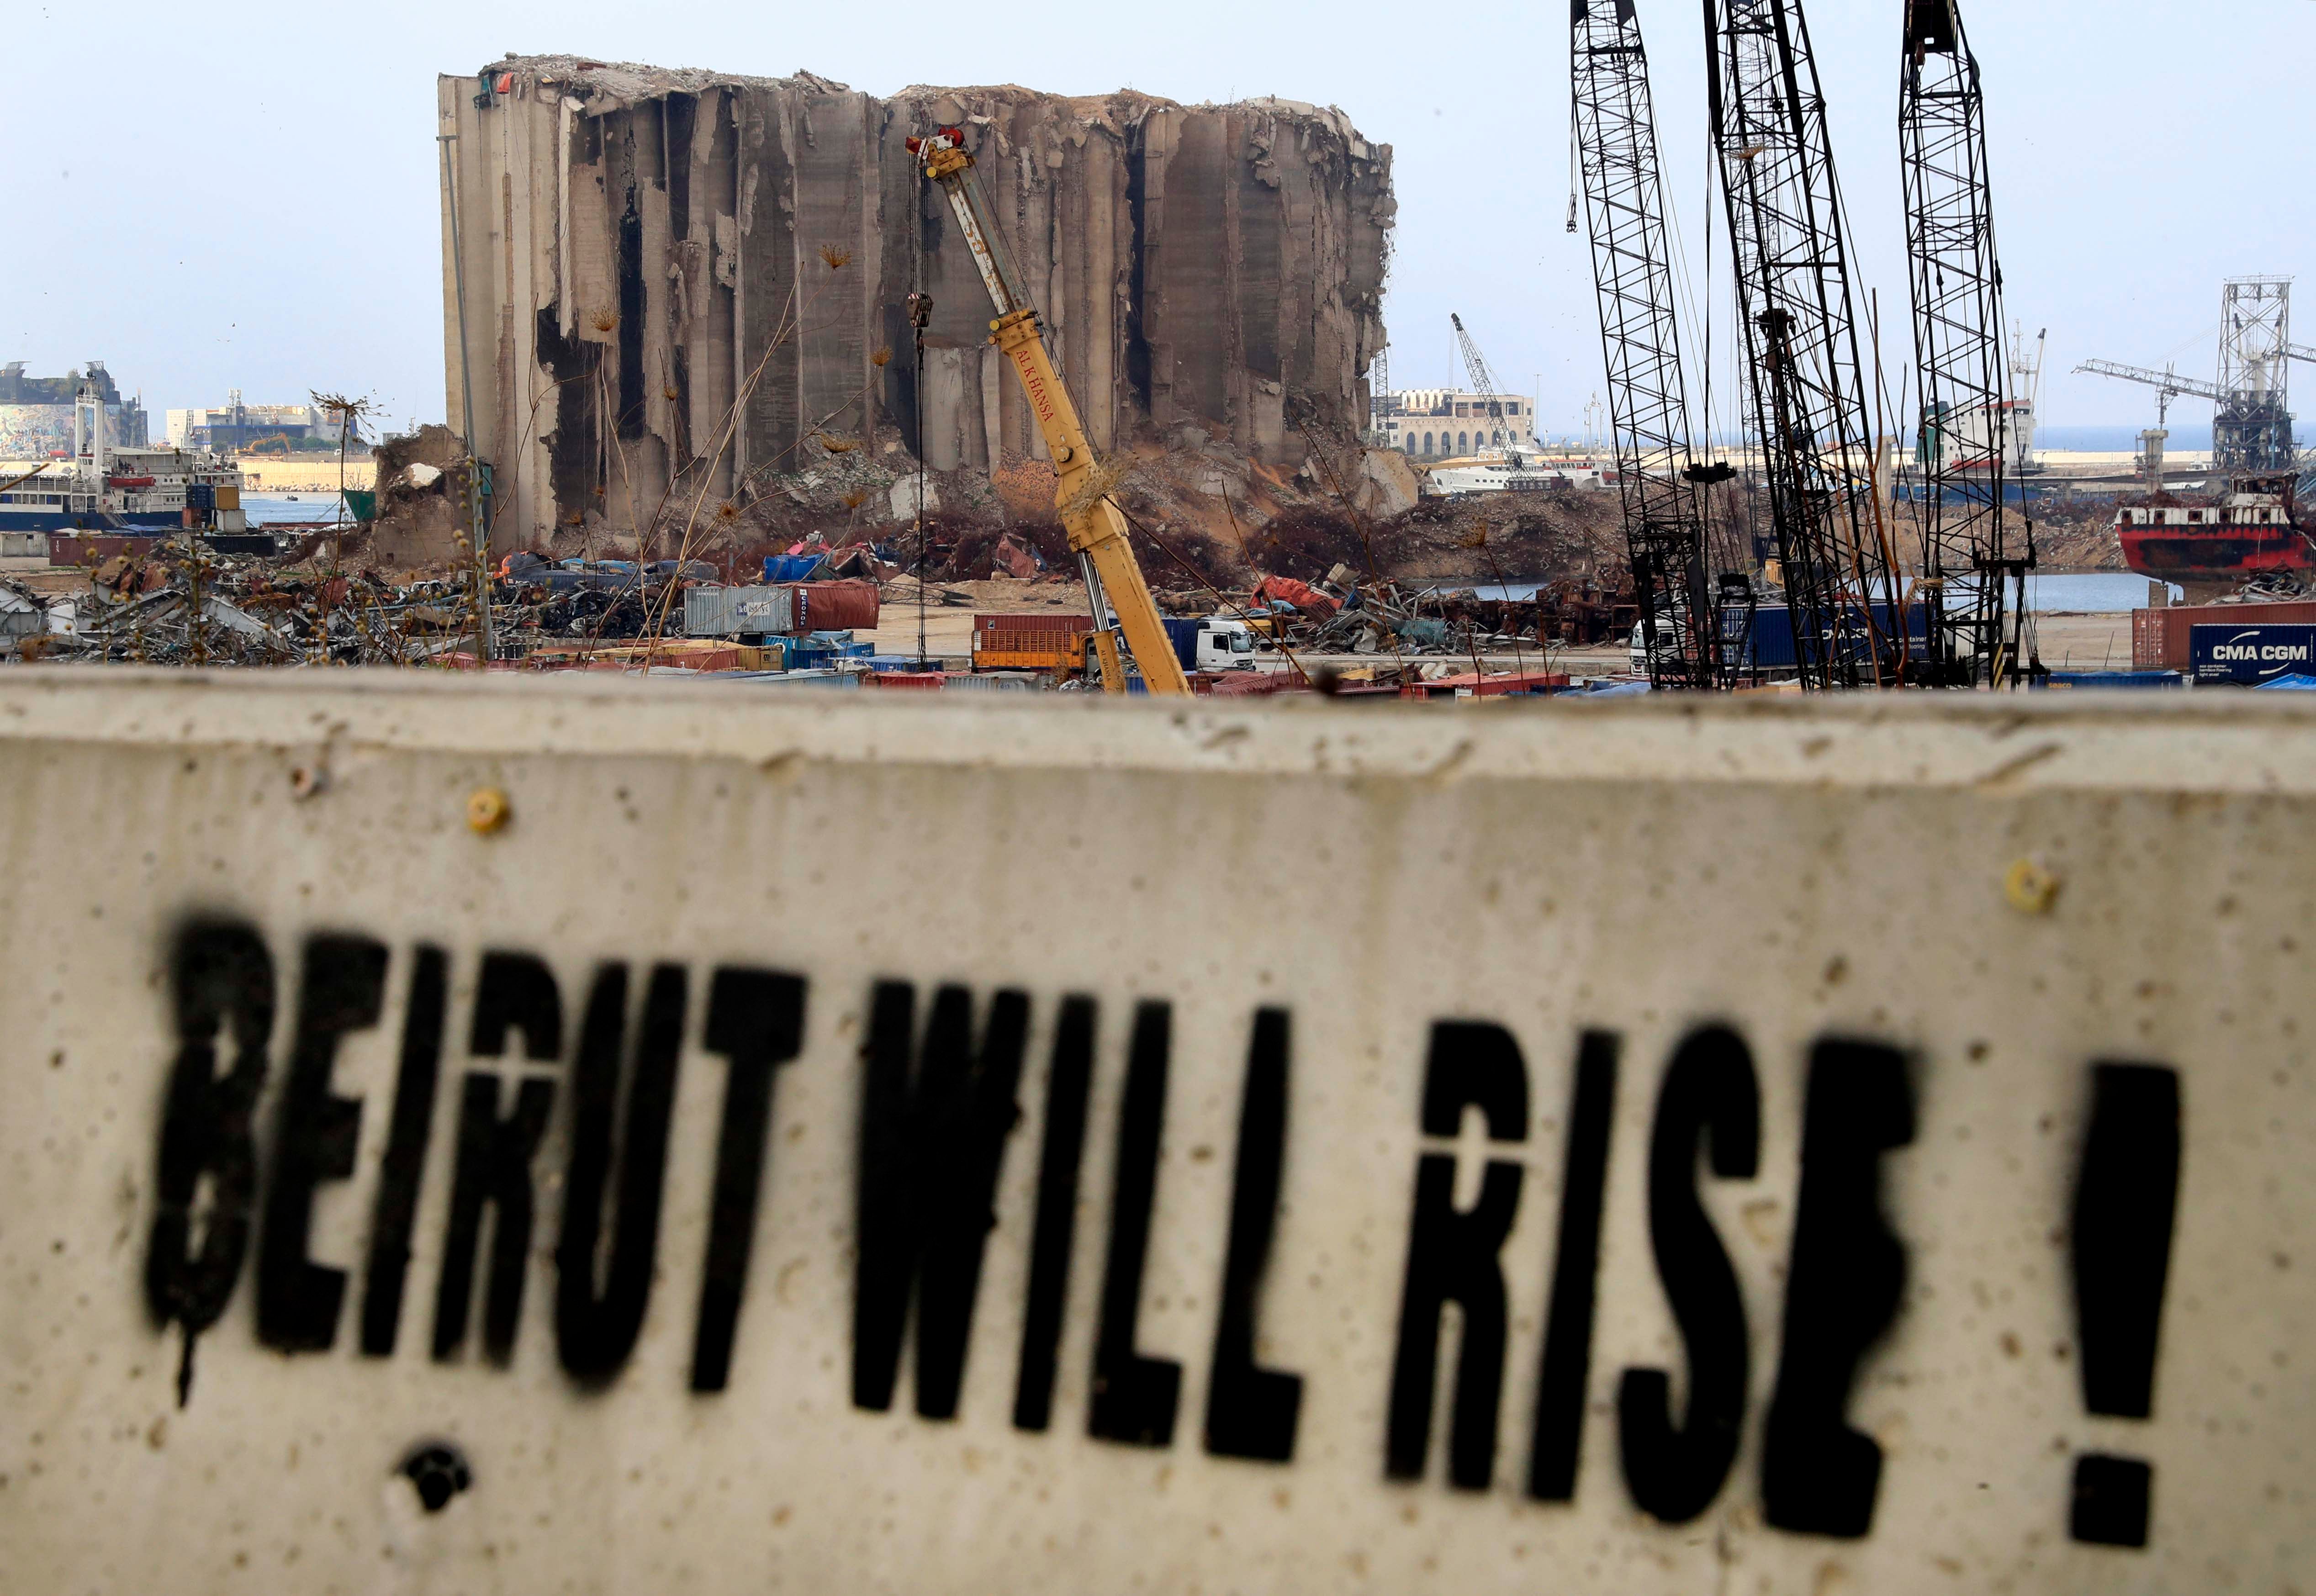 A slogan painted on a barrier in front of towering grain silos gutted in the massive August 2020 explosion at the Beirut port that claimed the lives of more than 200 people, December 2, 2020.